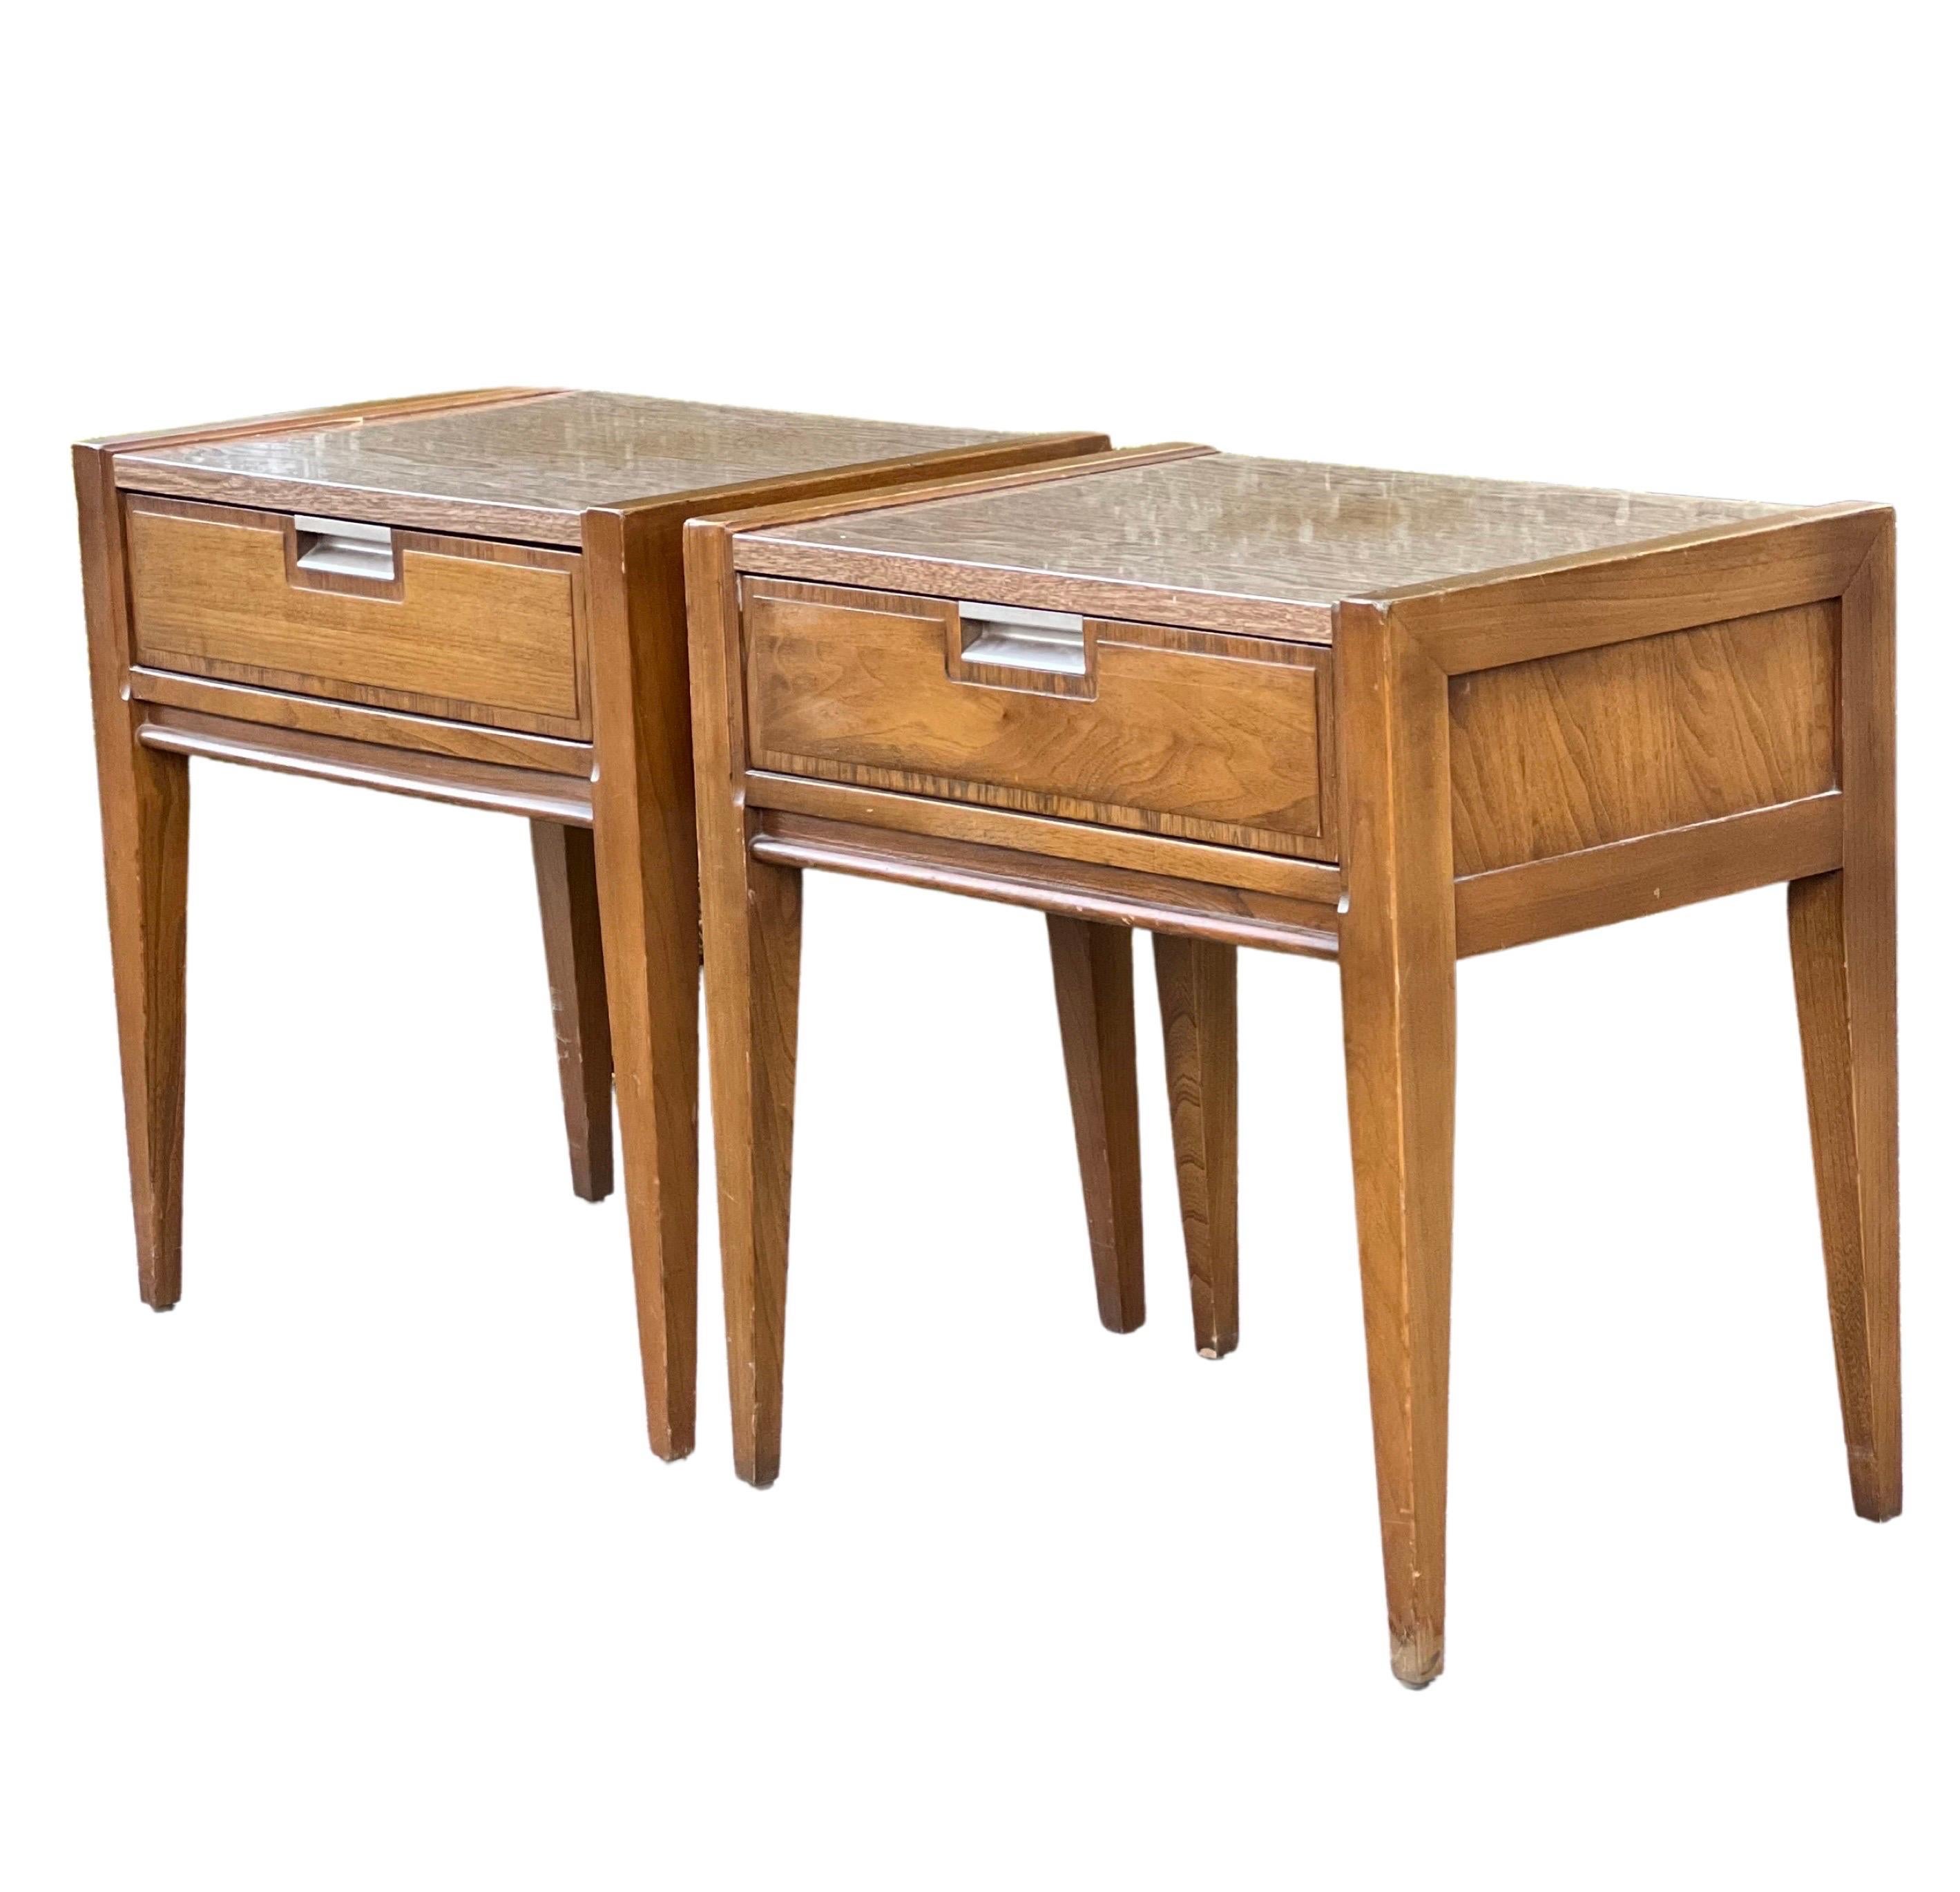 Great pair of mid century walnut nightstands by Basic Witz. 

These lovely stands feature one dovetail drawer with cross-band detail and an inset brushed aluminum pull. The tops have a protective laminate creating an attractive, lightly two-toned